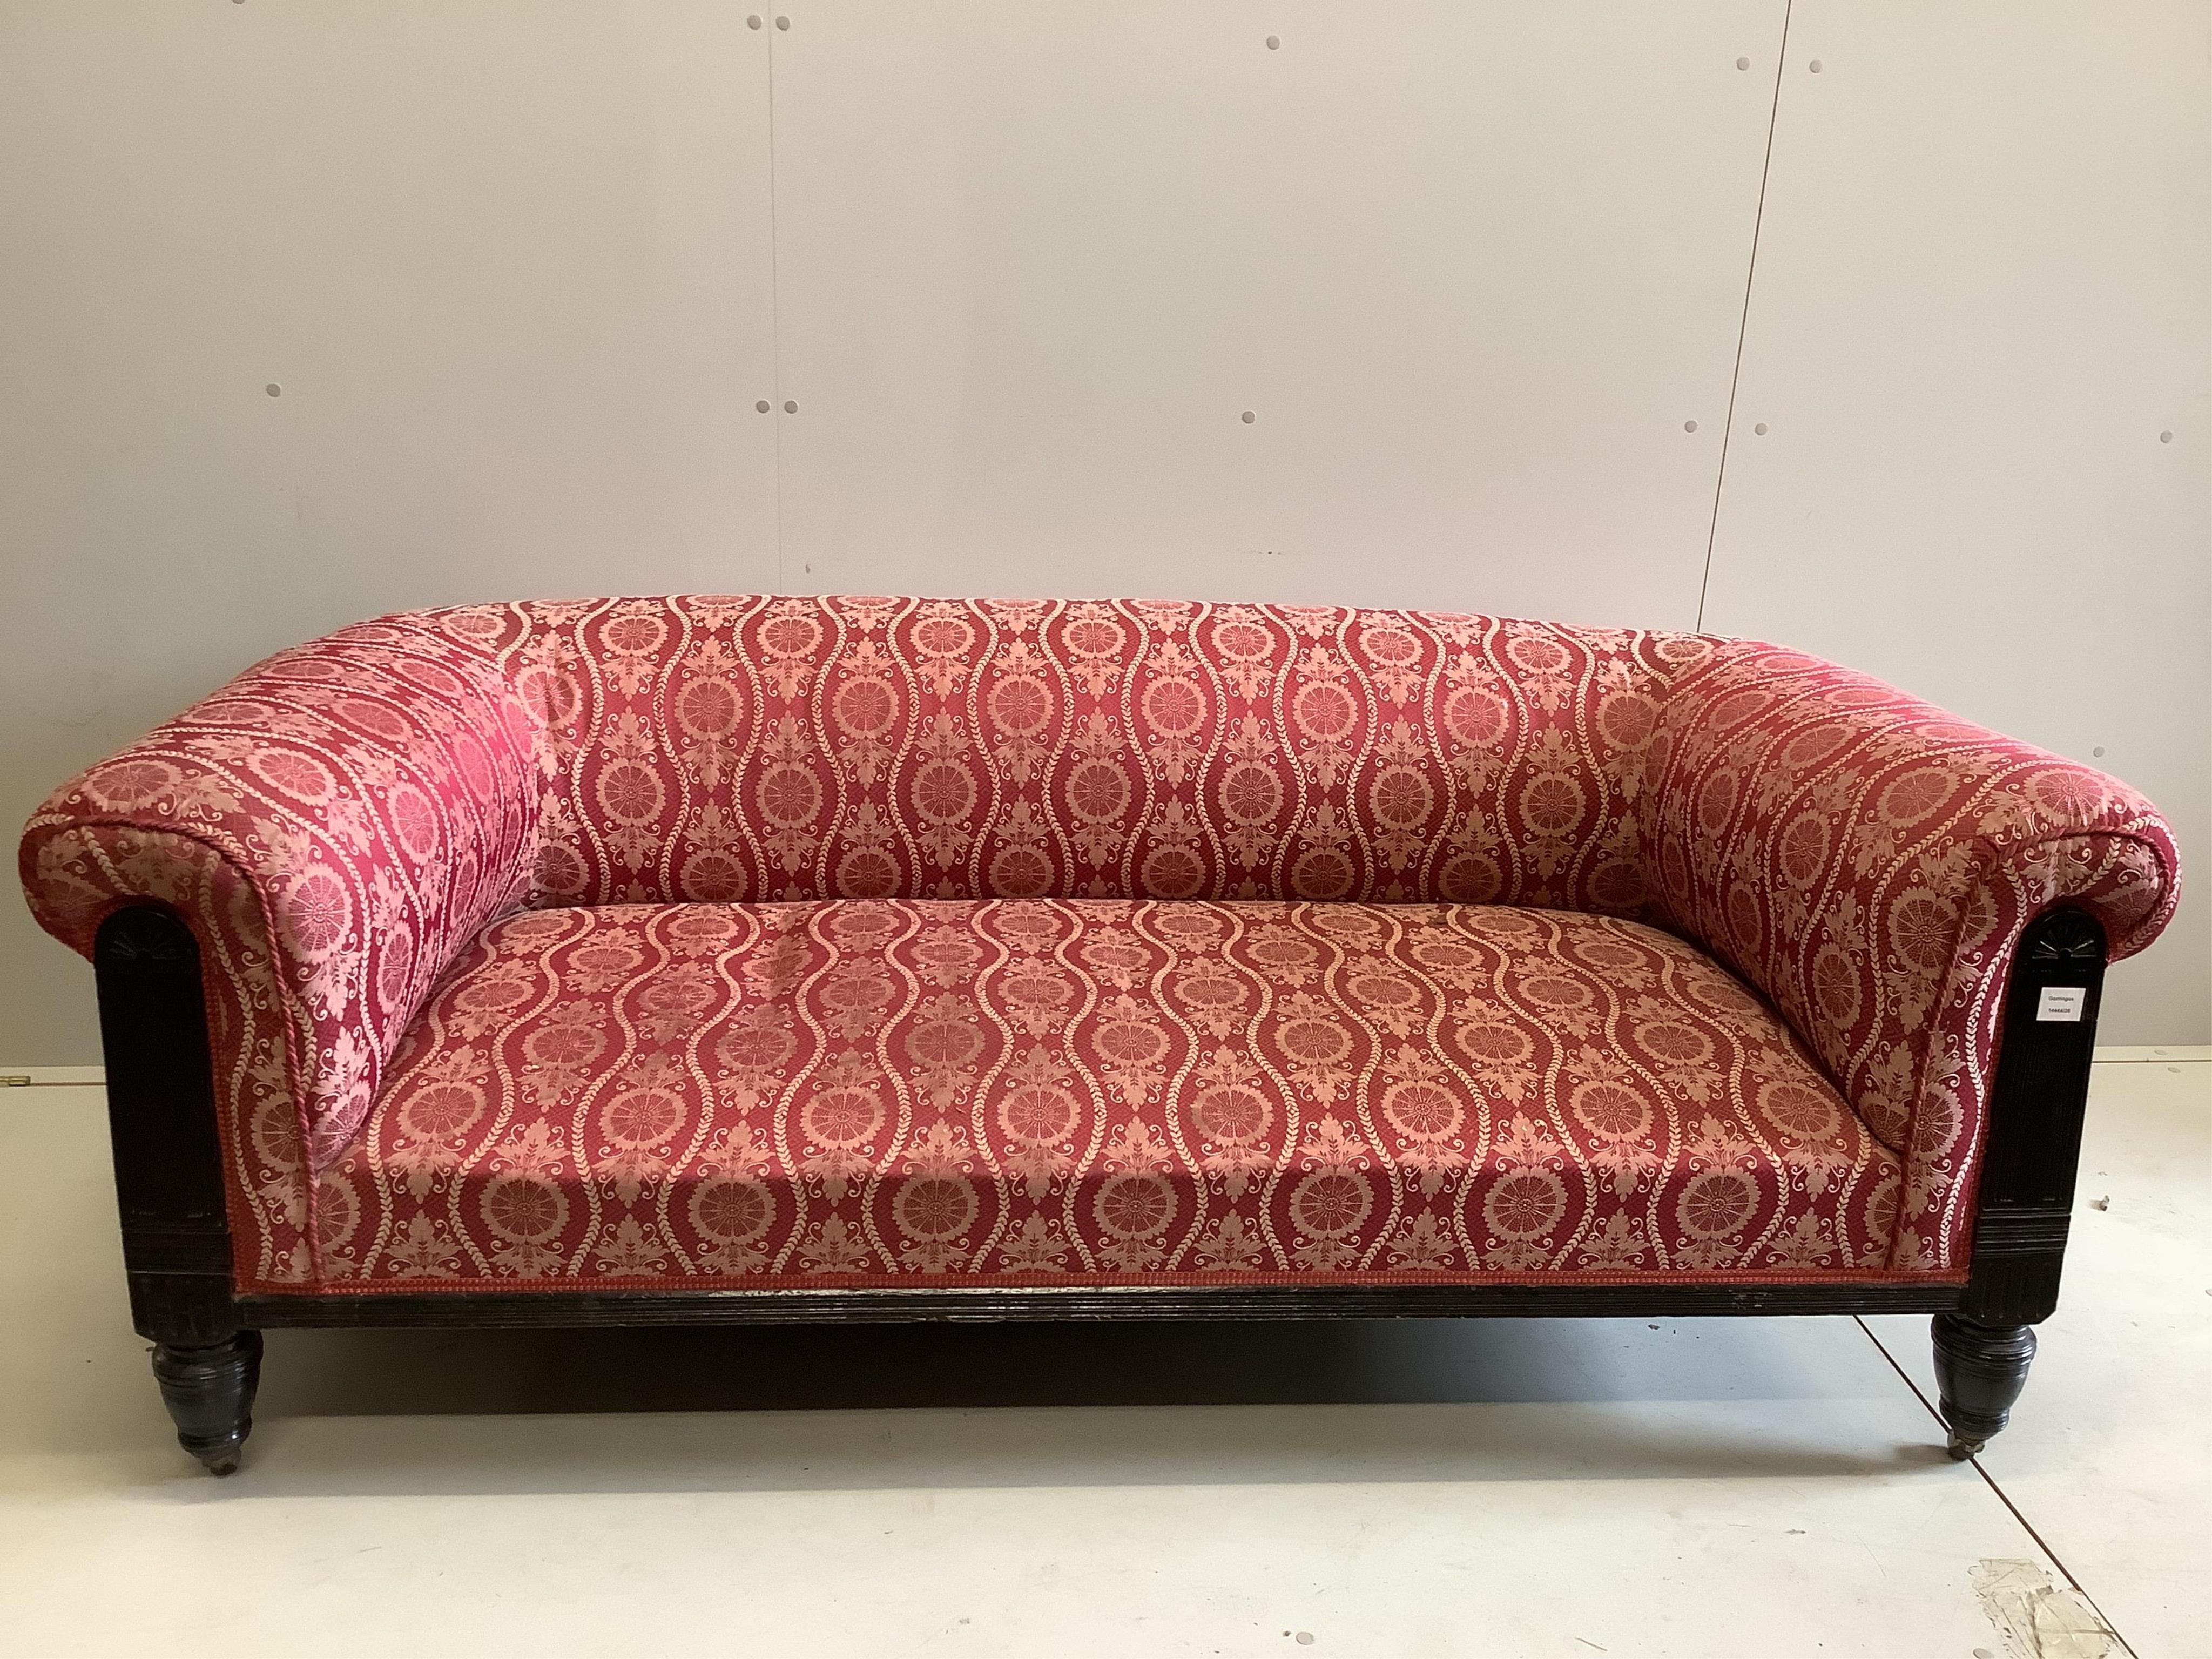 A late Victorian ebonised upholstered settee, the red and cream brocade fabric over horse hair upholstery, width 180cm, depth 88cm, height 70cm. Condition - good